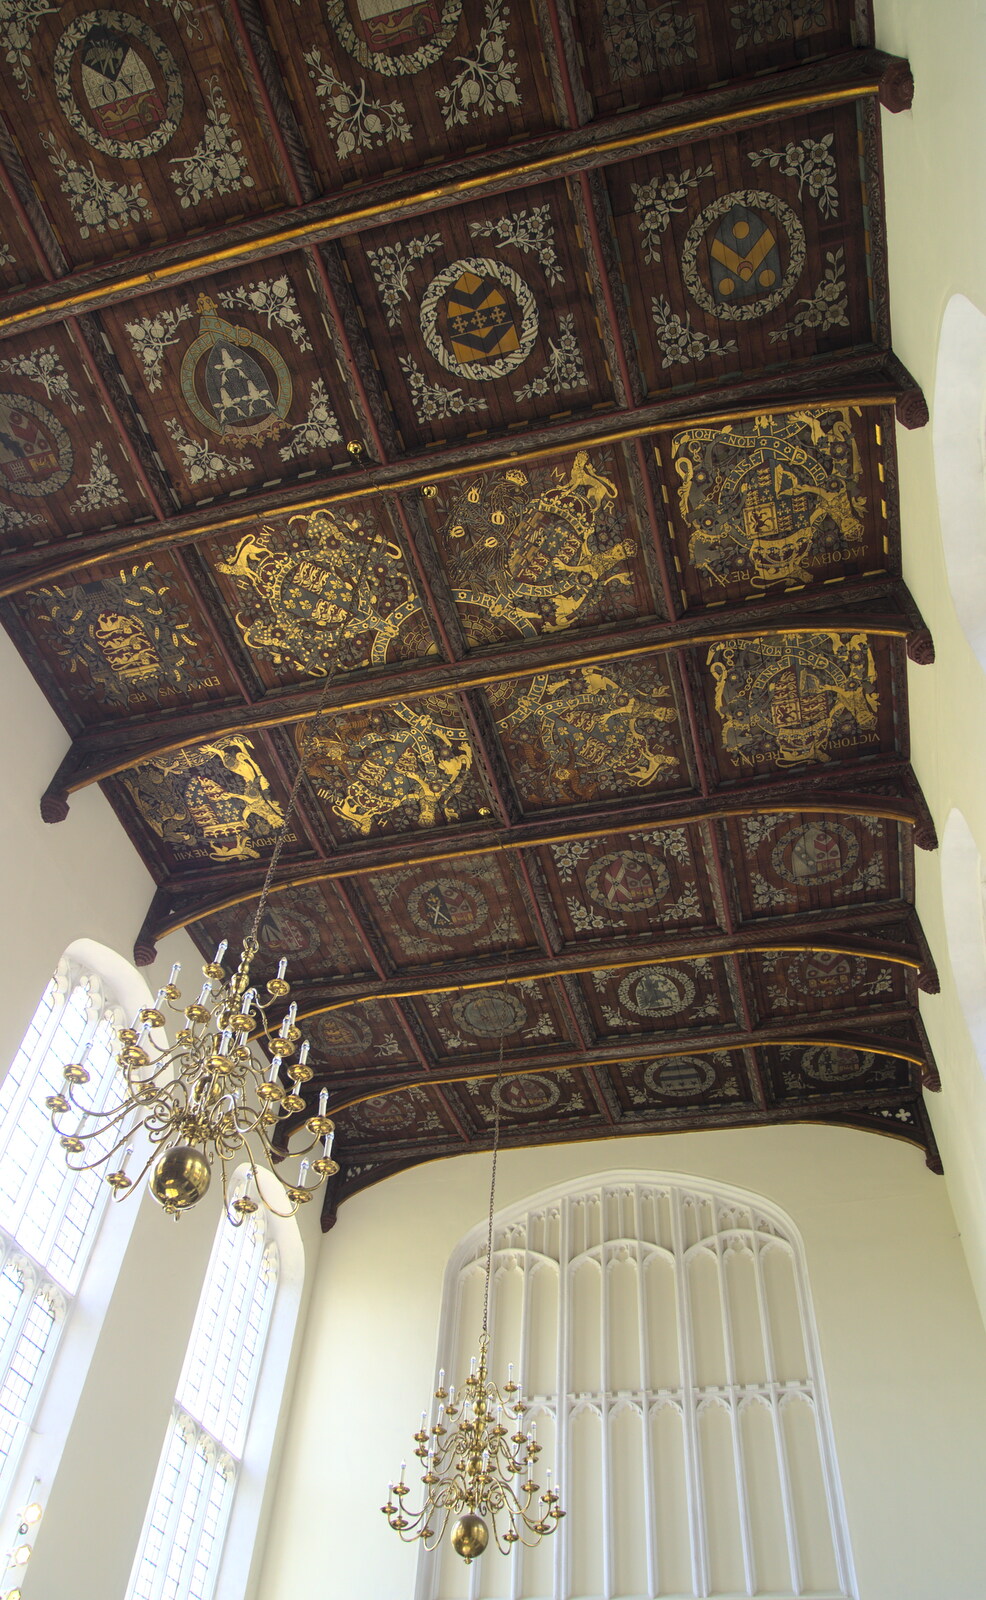 Ornate ceiling from Punting With Grandad, Cambridge, Cambridgeshire - 6th June 2015